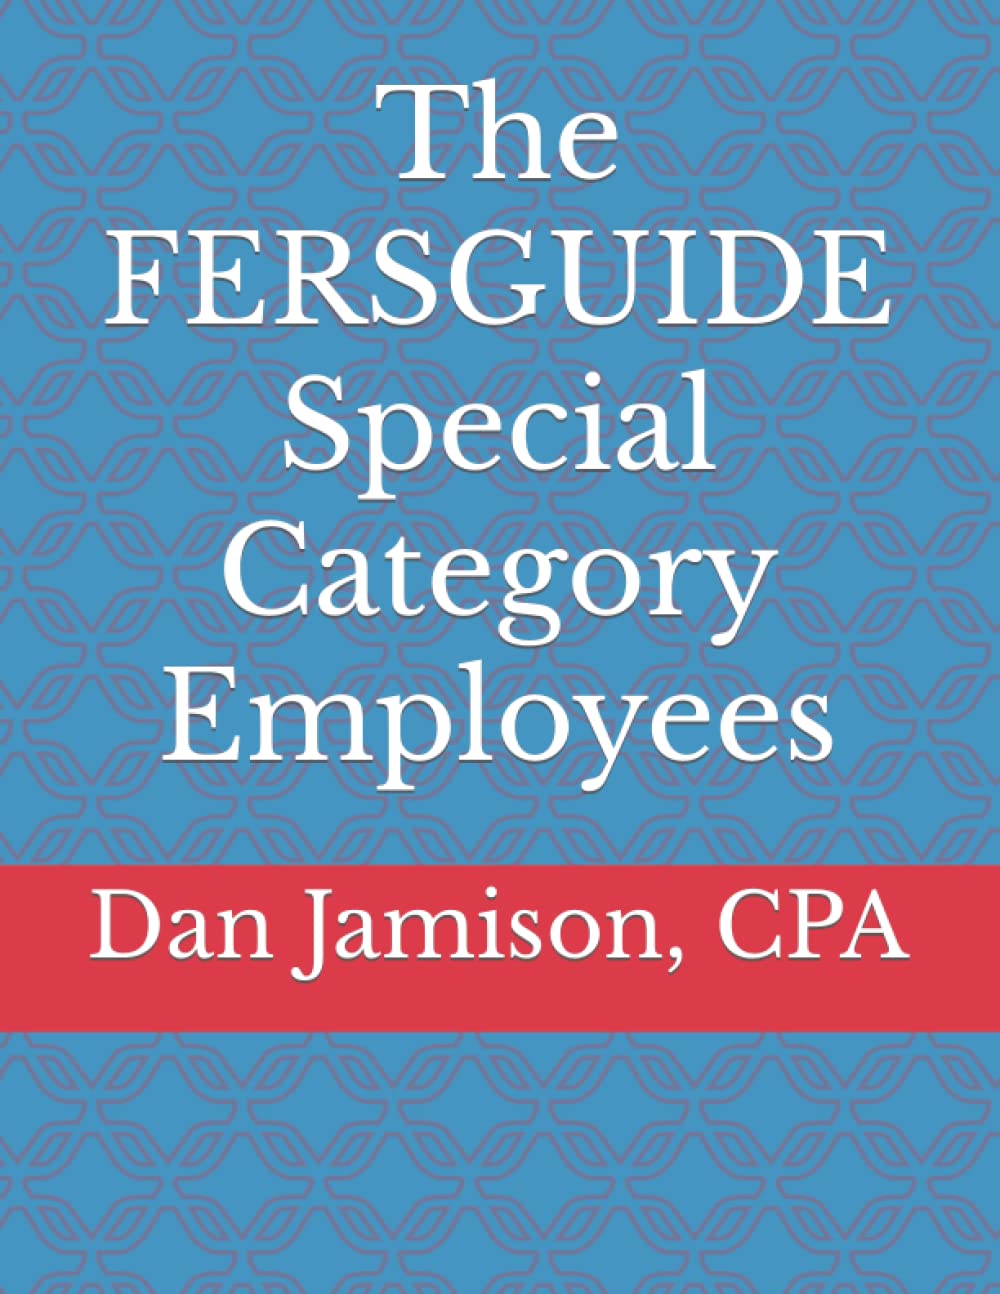 The fersguide special category employees, Dan Jamison CPA